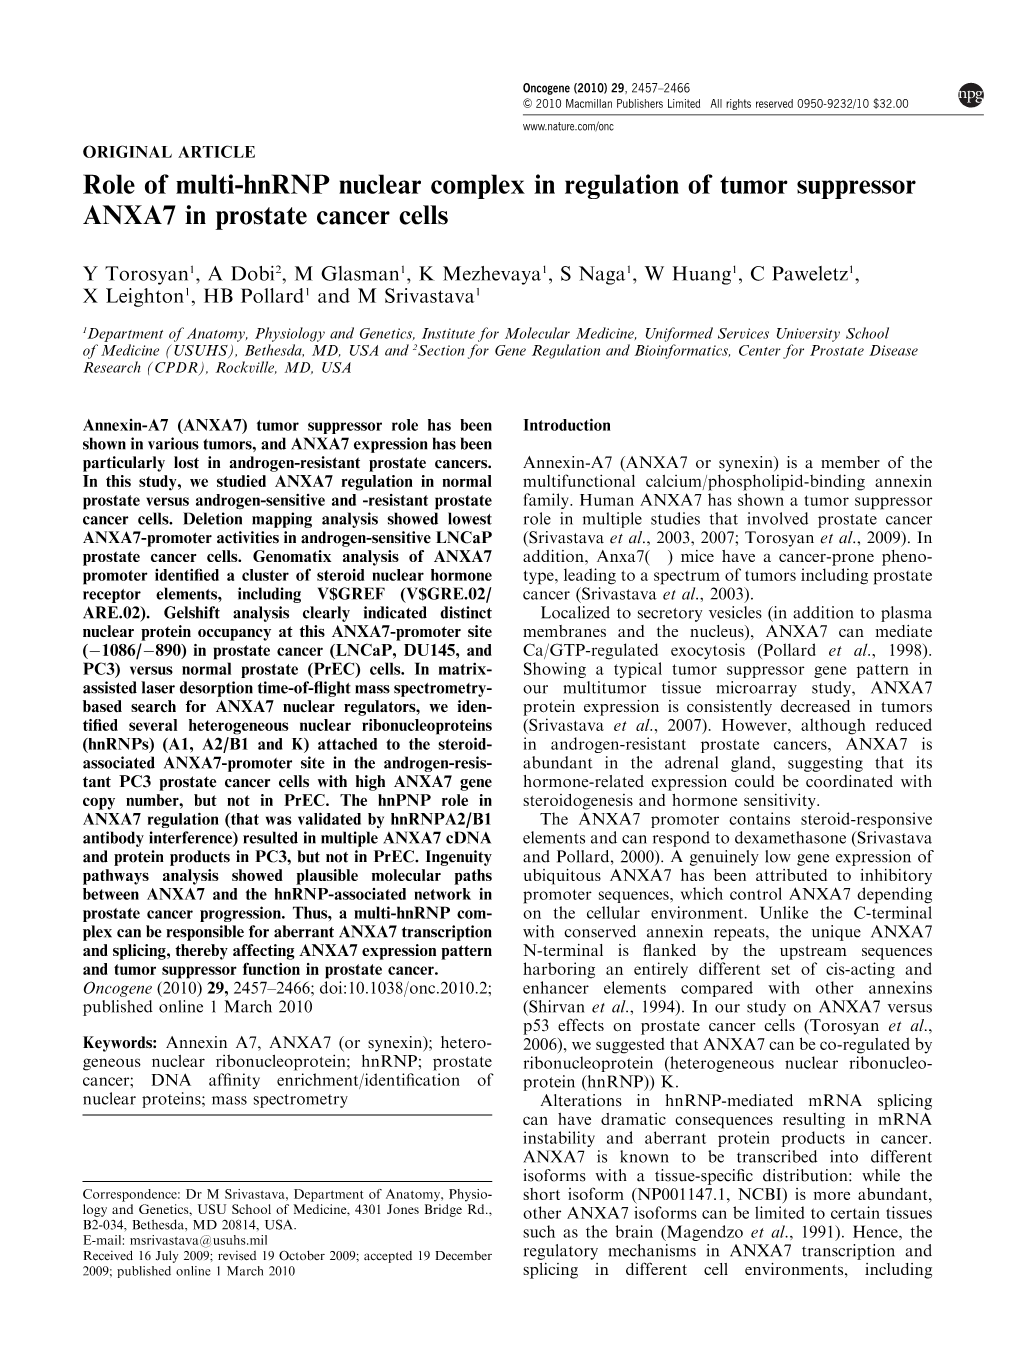 Role of Multi-Hnrnp Nuclear Complex in Regulation of Tumor Suppressor ANXA7 in Prostate Cancer Cells